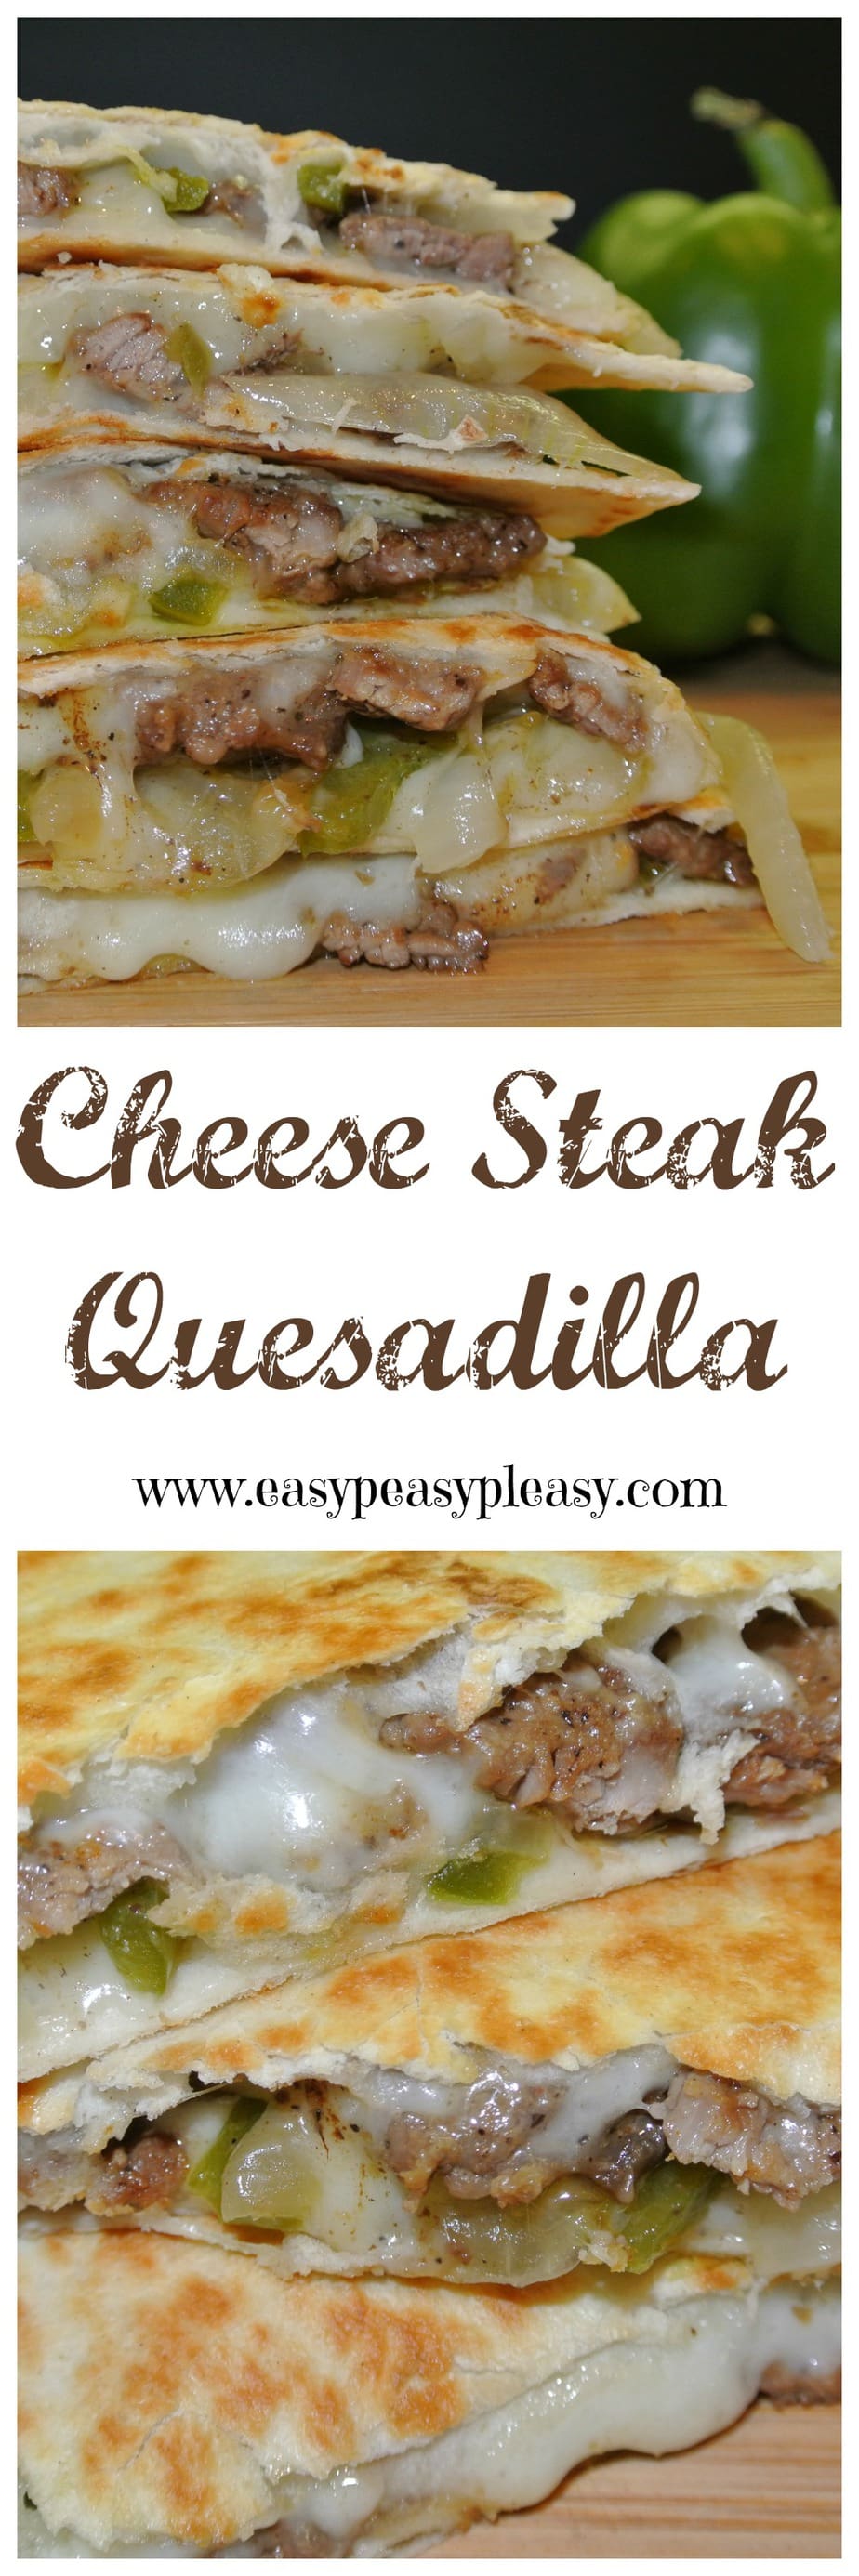 Quesadillas are in regular rotation at my house but sometimes I need a change. Cheese Steak Quesadillas are the perfect twist on this Tex-Mex classic.